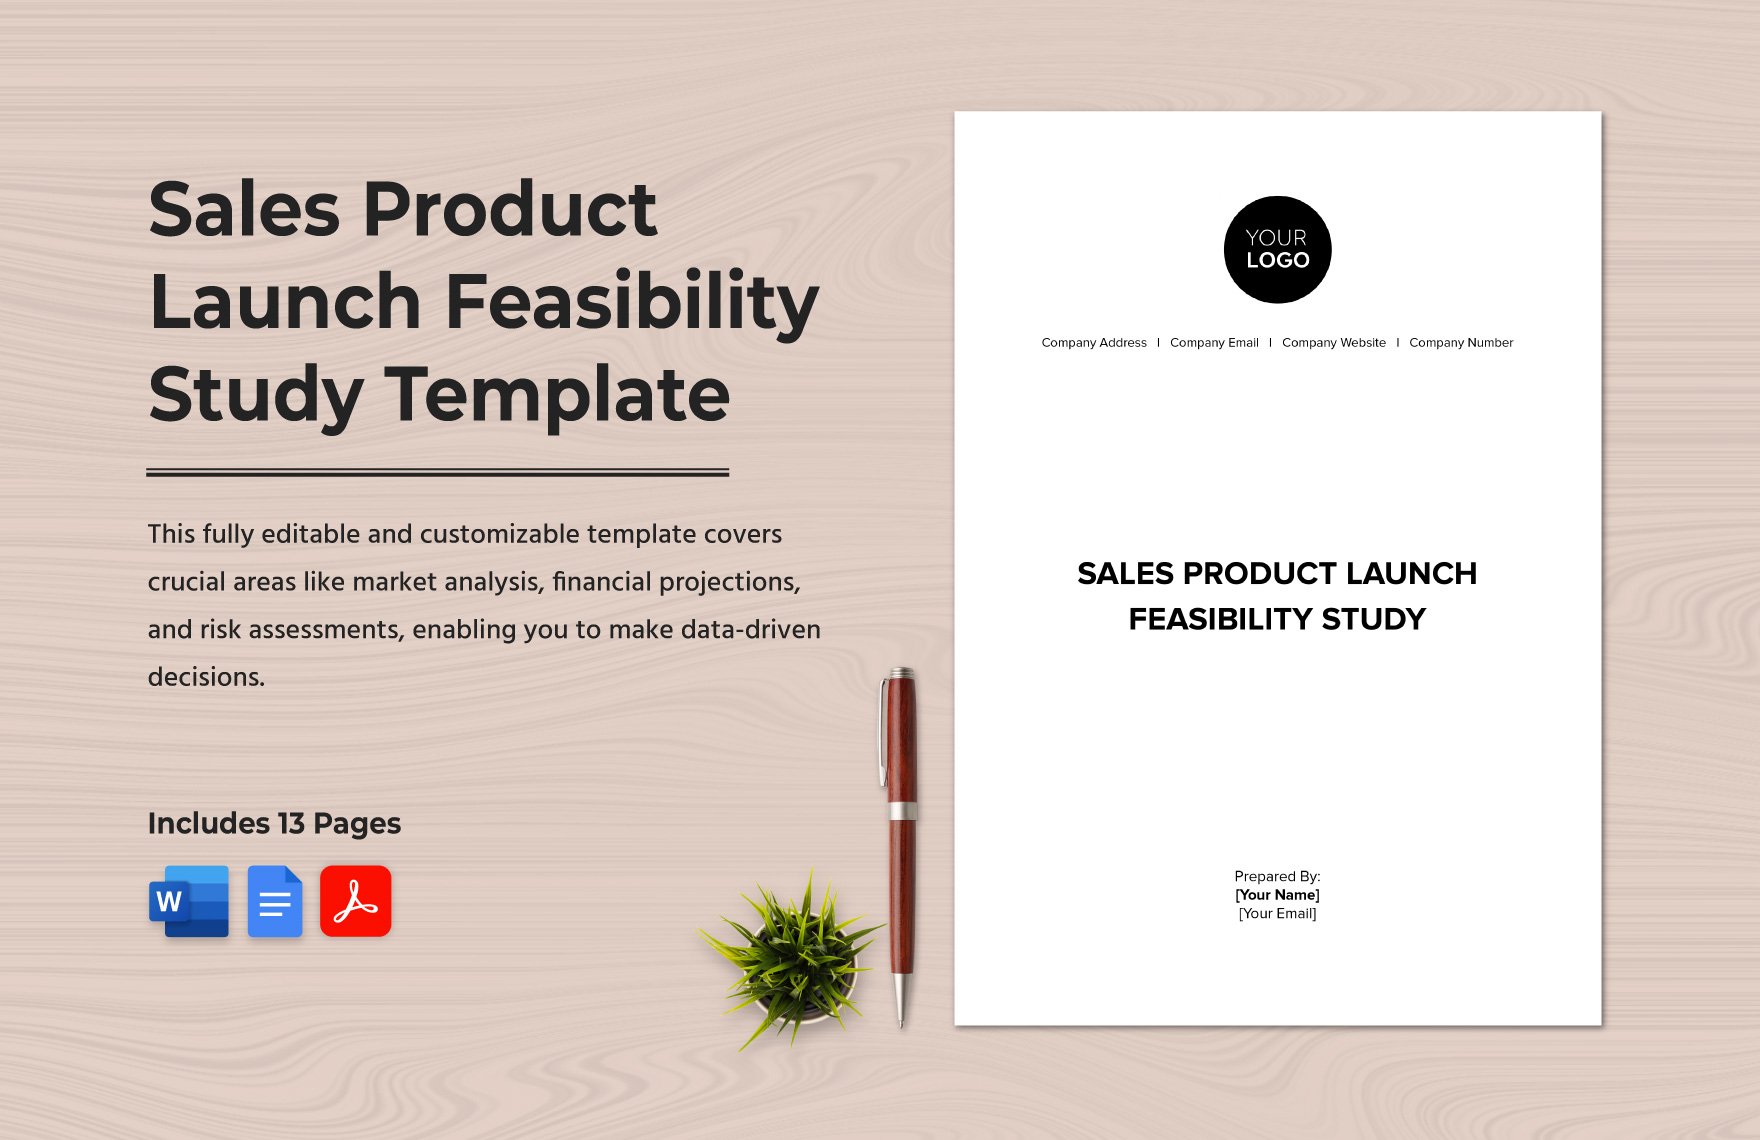 Sales Product Launch Feasibility Study Template in Word, Google Docs, PDF